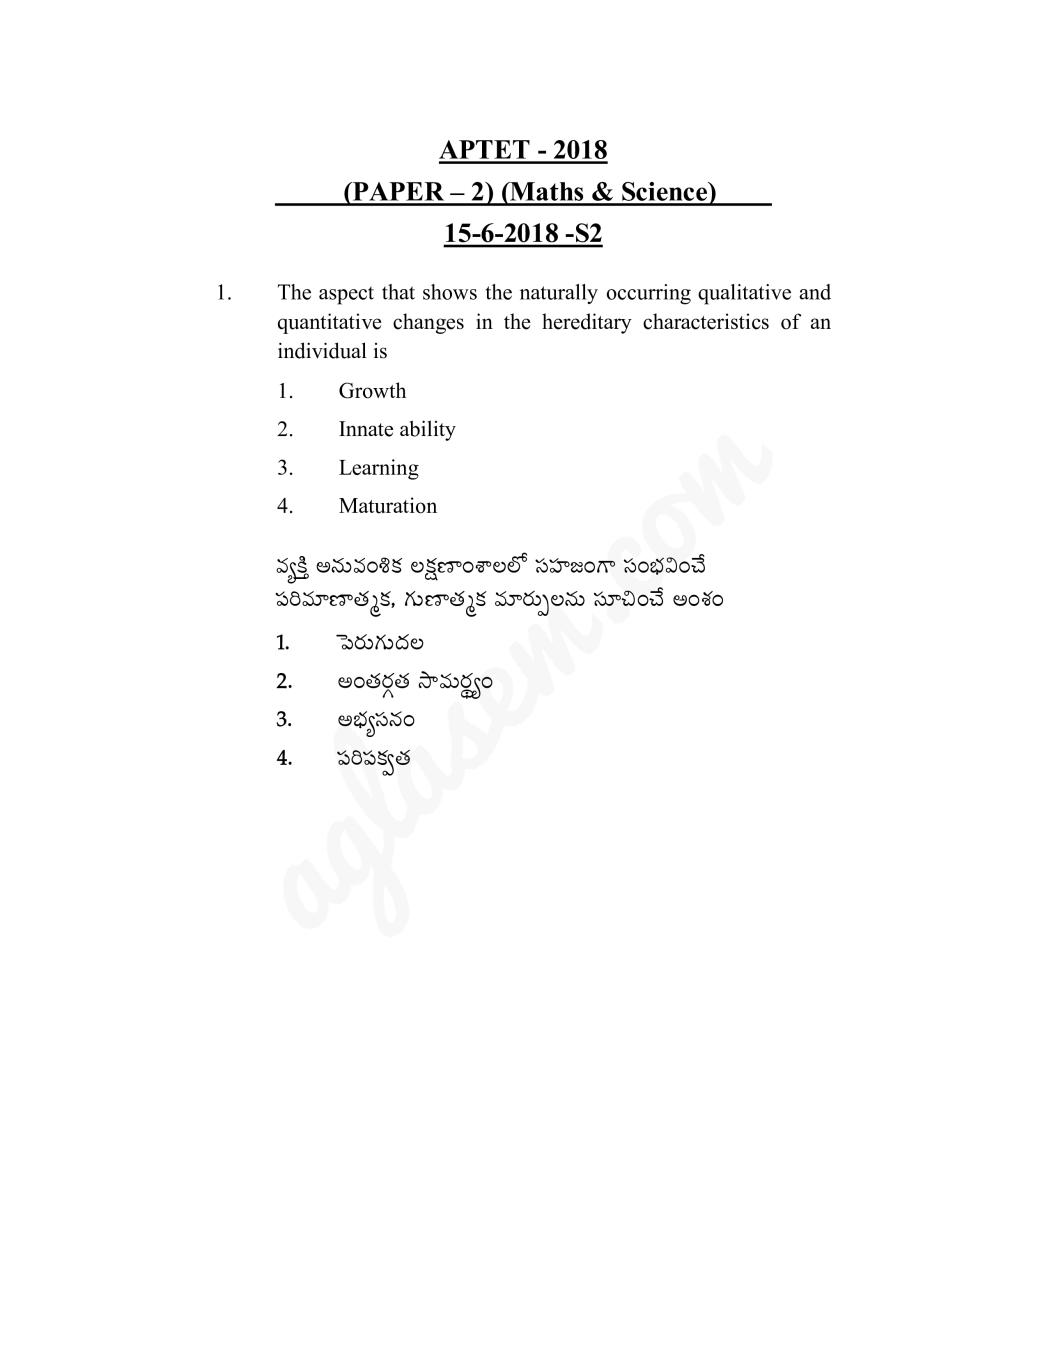 APTET Question Paper with Answers 15 Jun 2018 Paper 2 Maths and Science (Shift 2) - Page 1